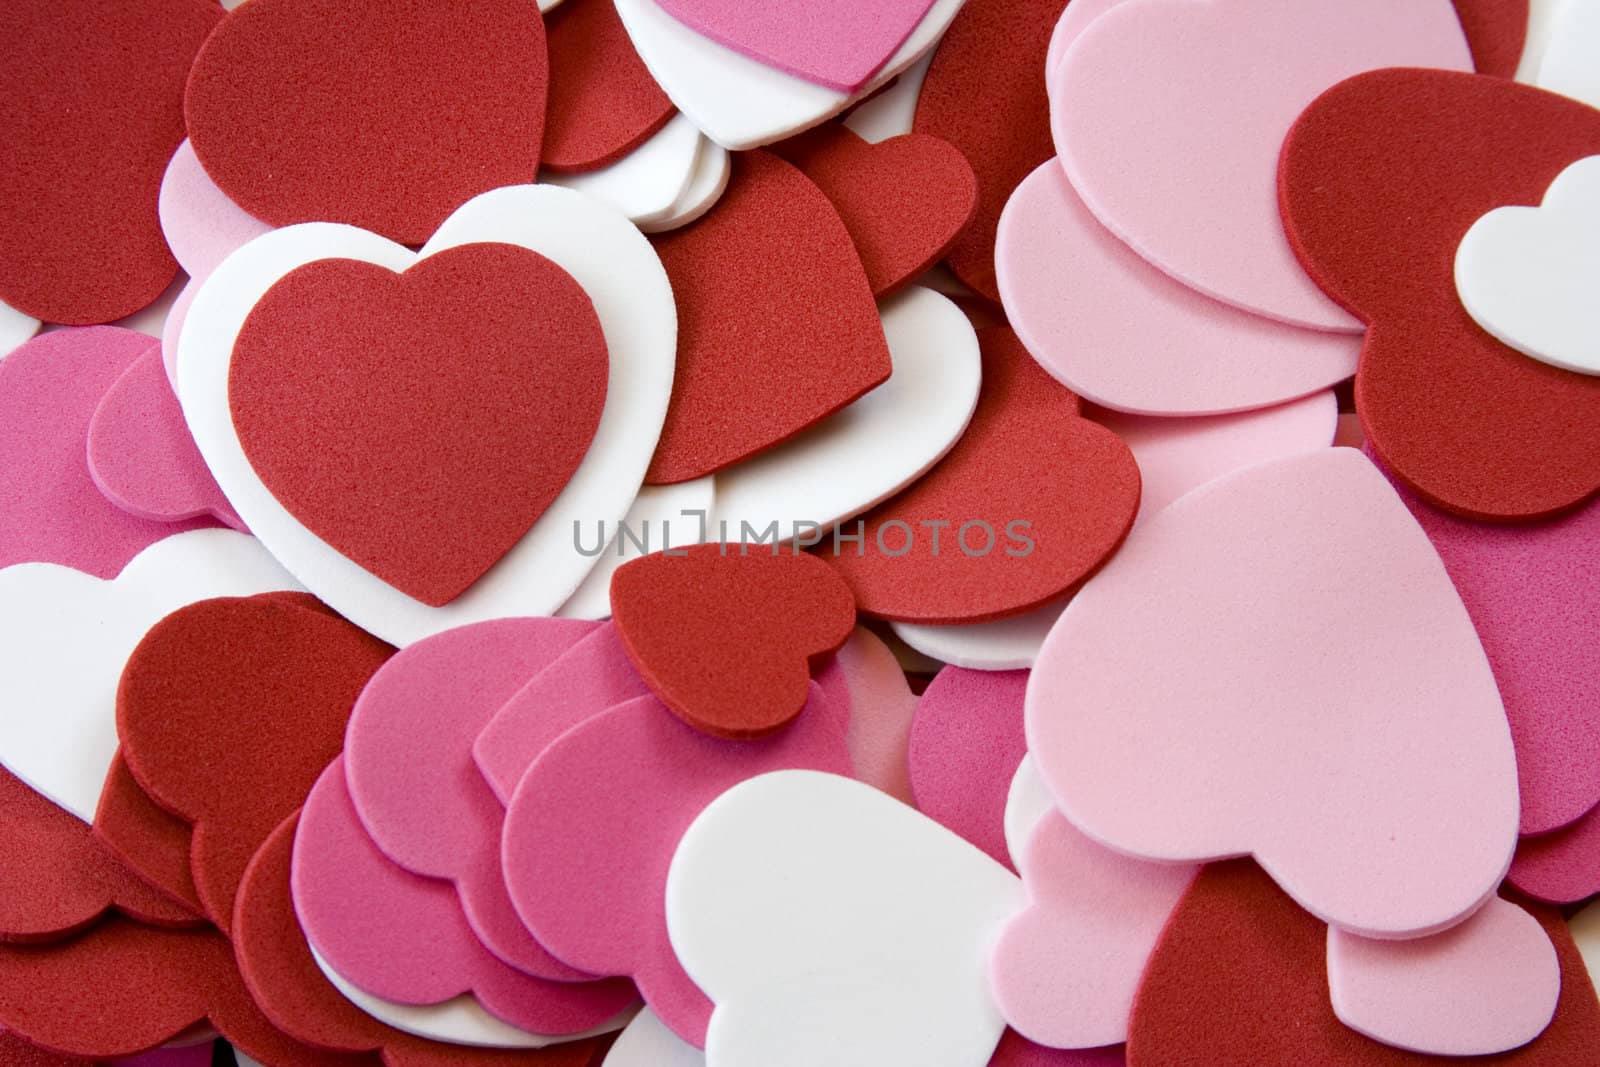 Heart foam cut outs stacked on top of each other pink, red, and white nice background image